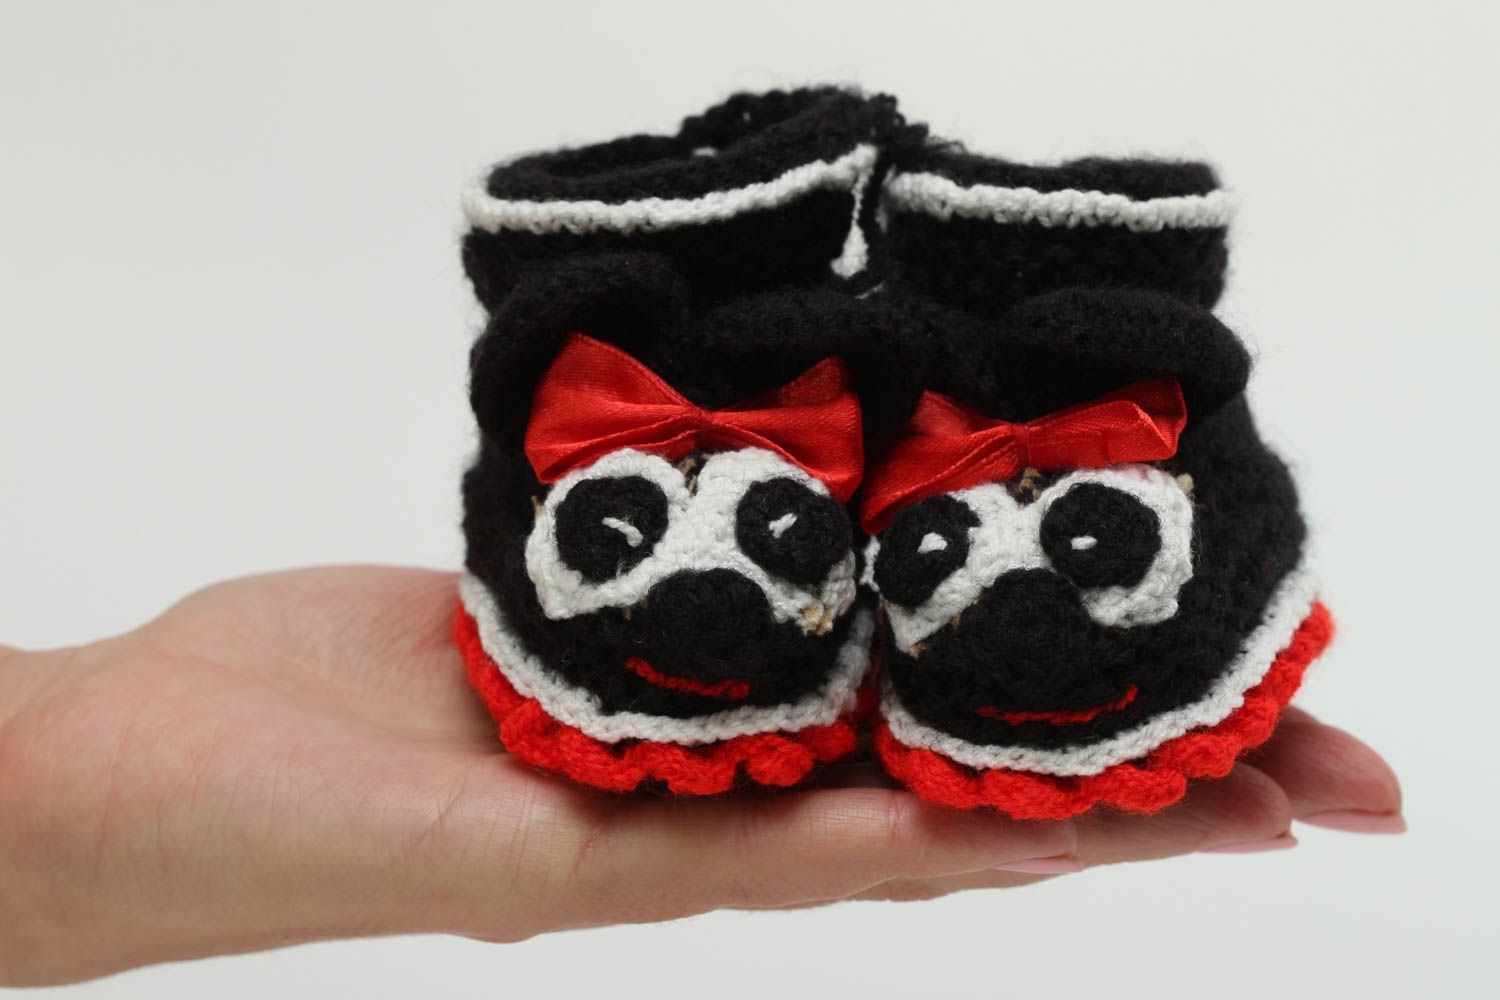 Bright handmade baby bootees crochet baby booties fashion kids gift ideas photo 5